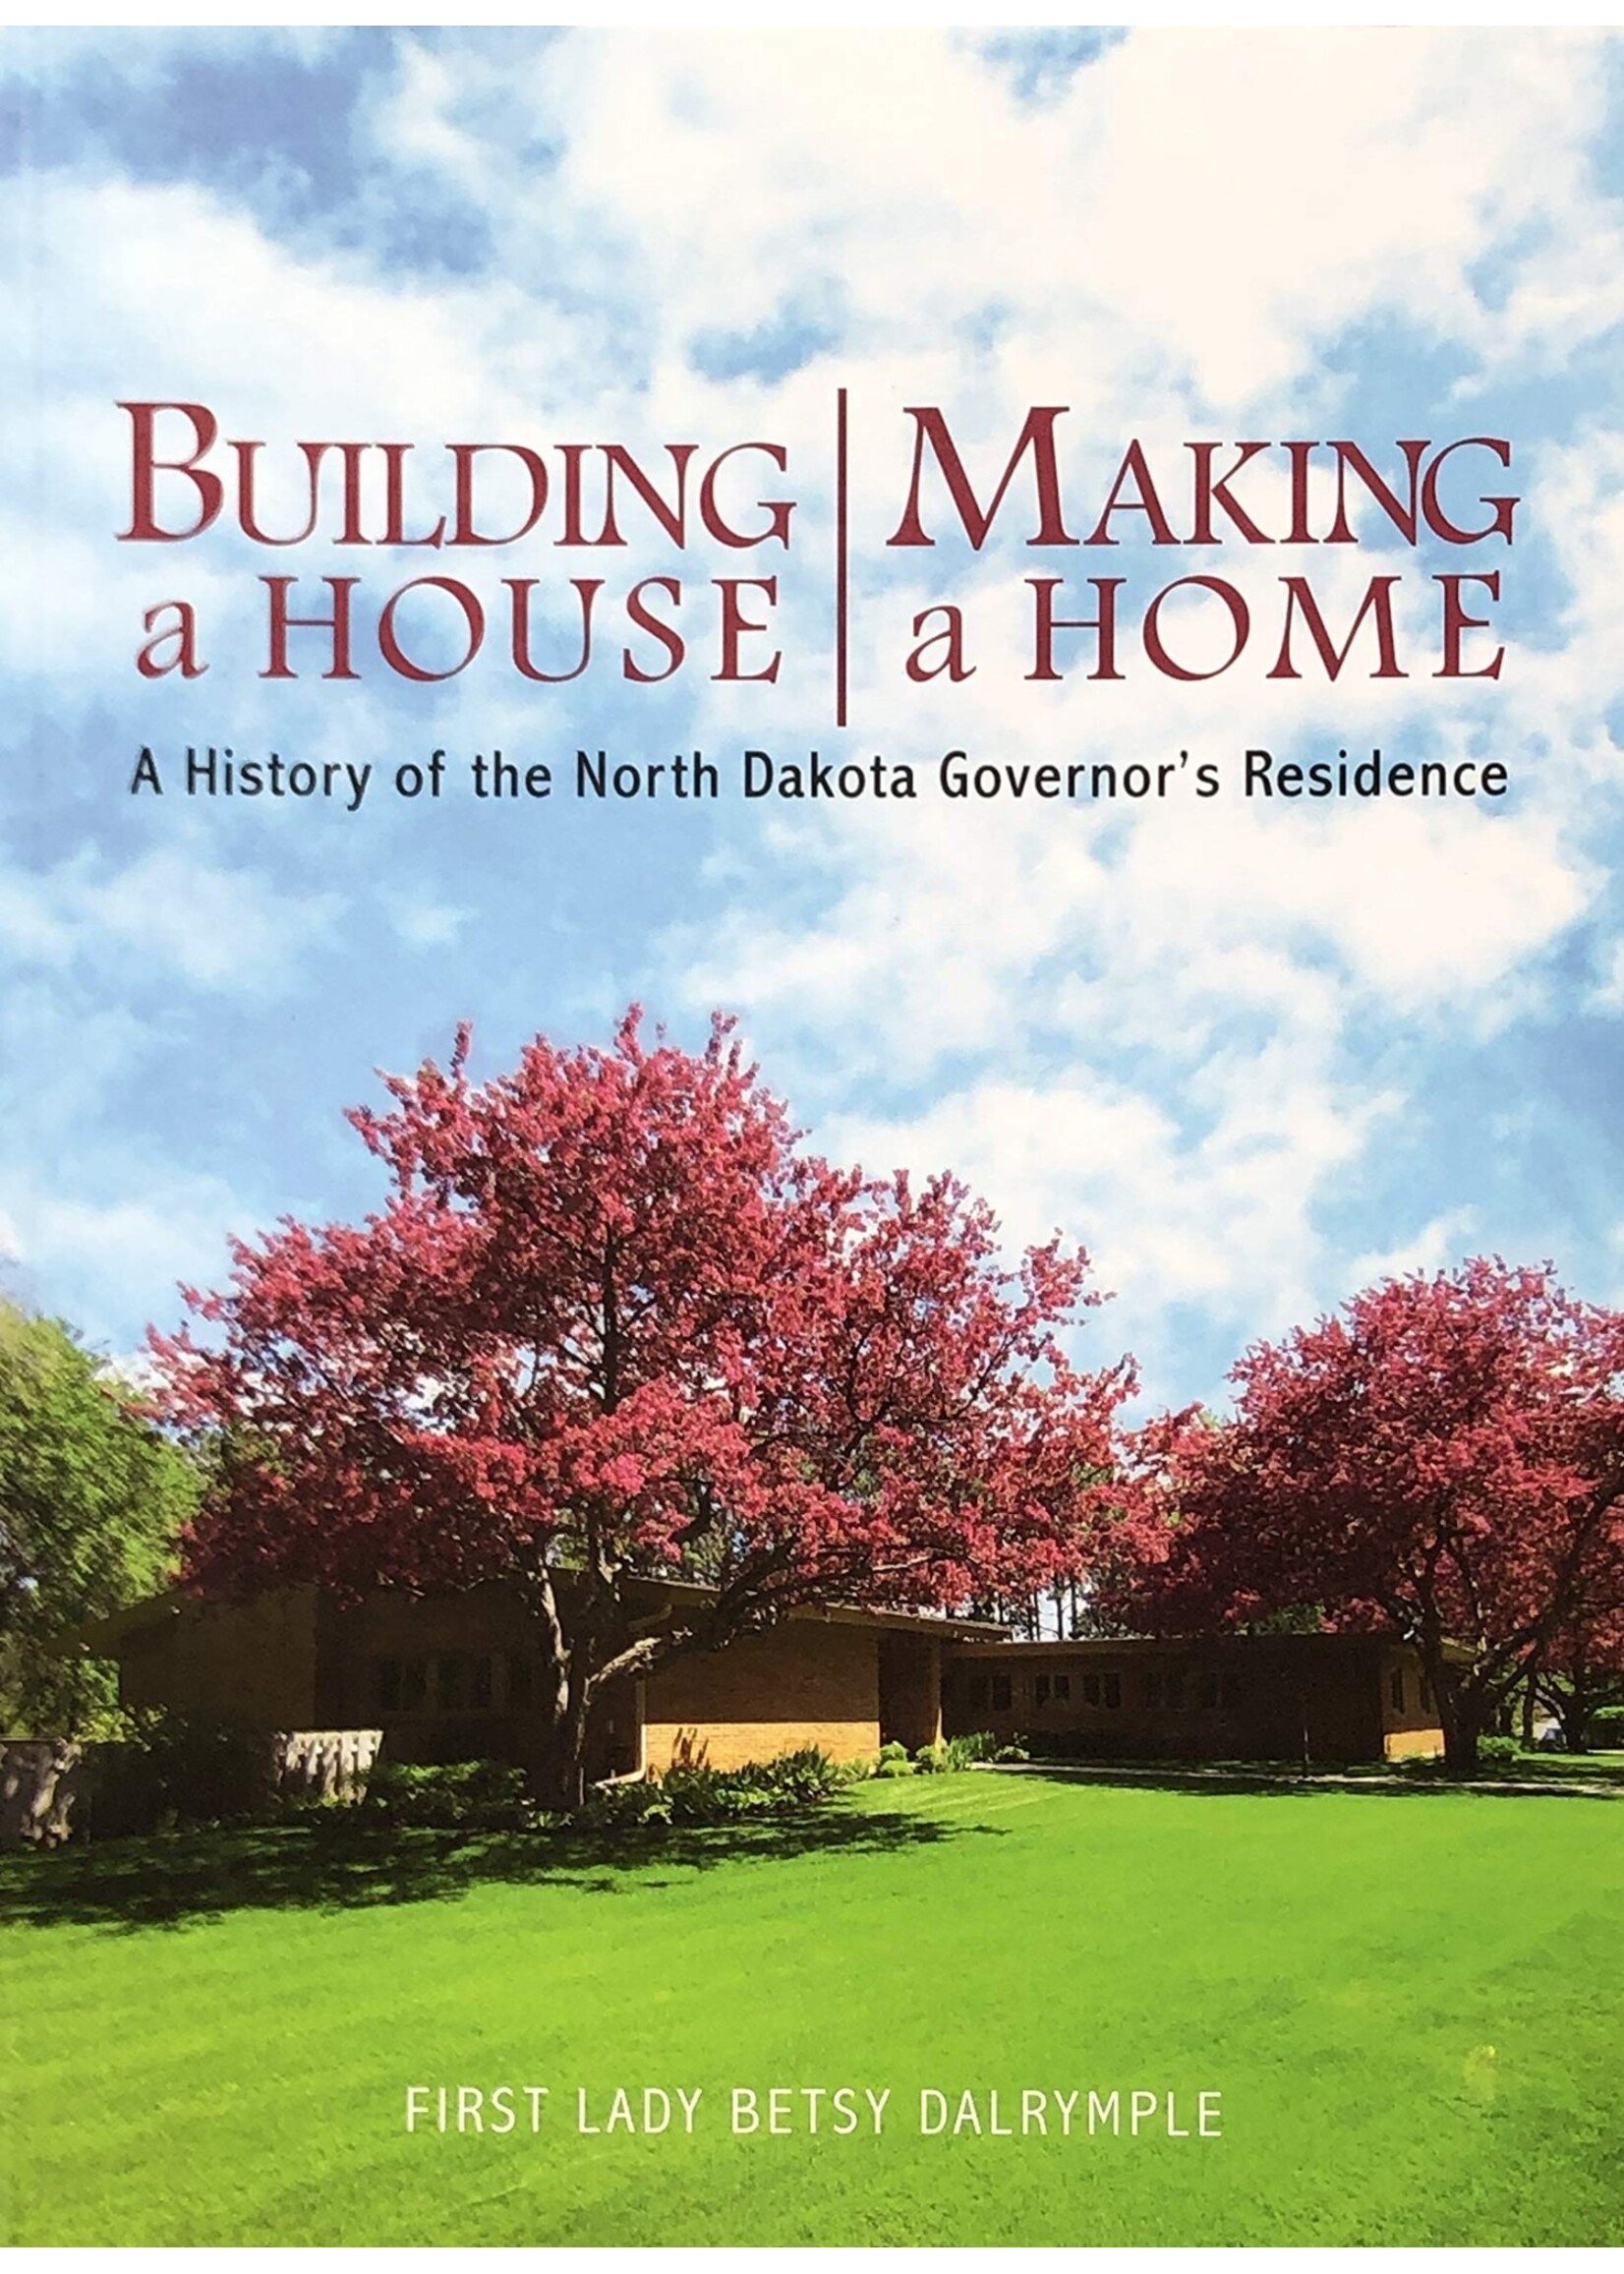 Building a House, Making a Home: A History of the North Dakota Governor's Residence